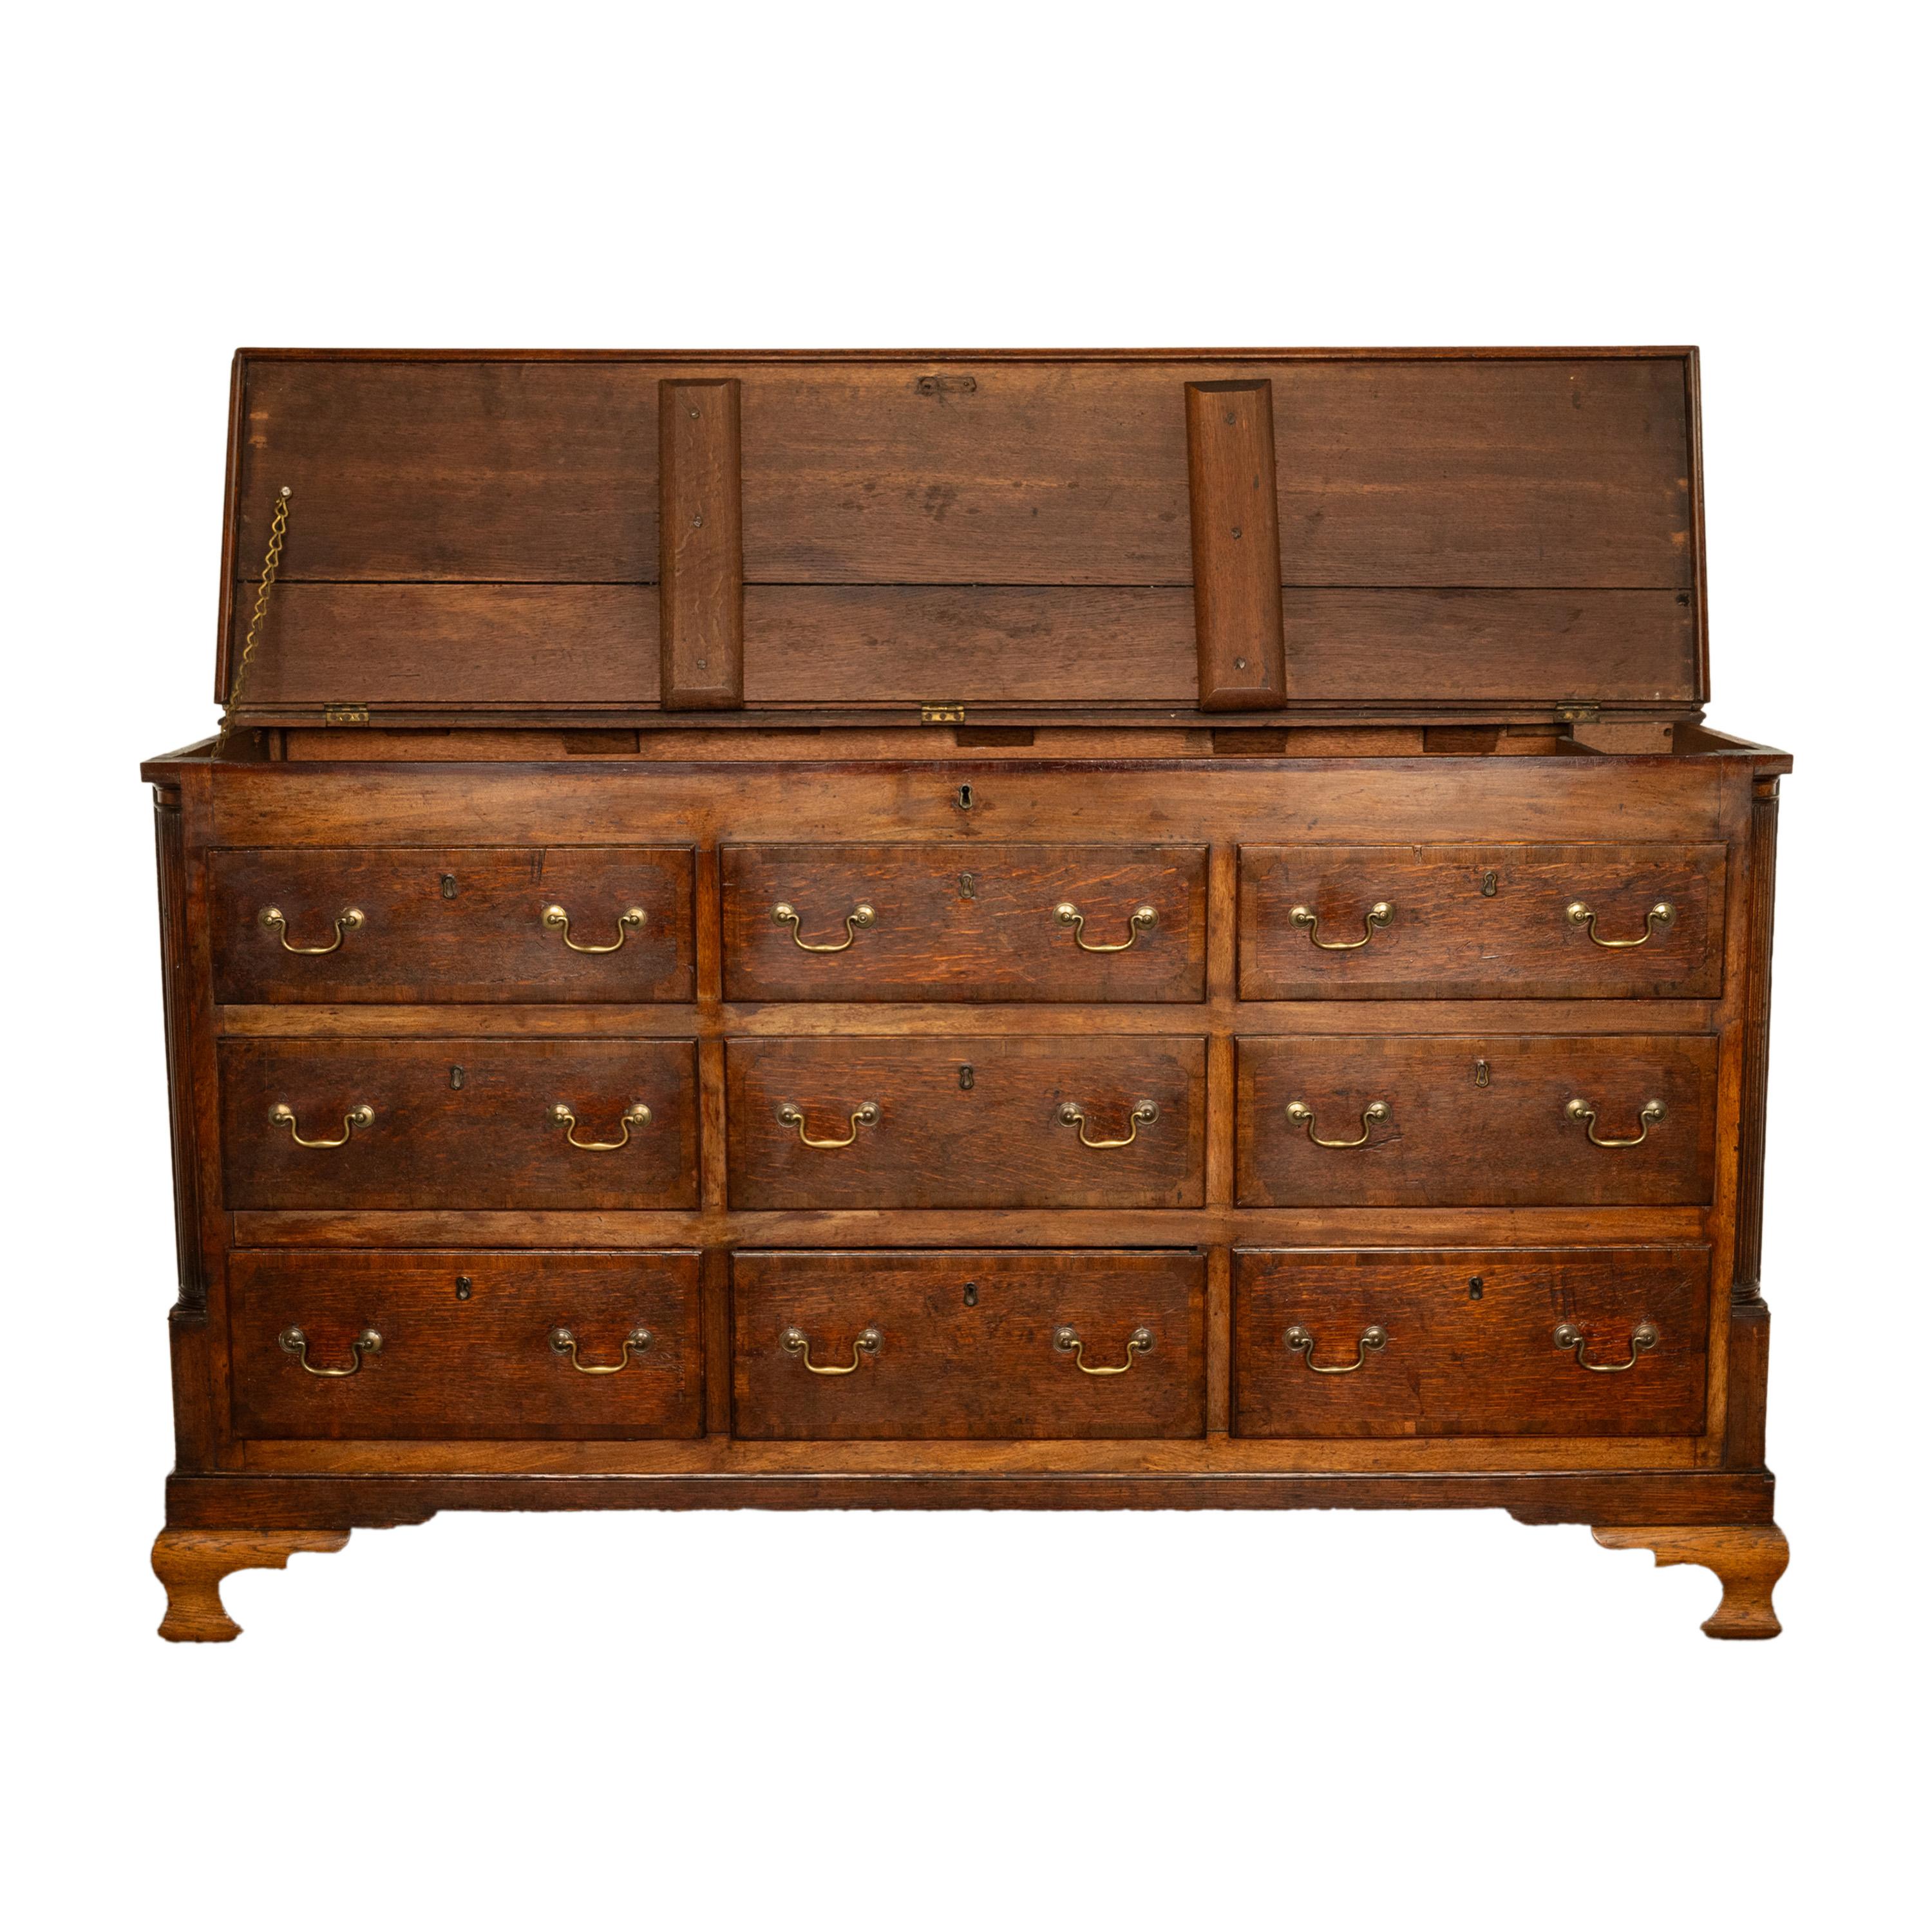 Antique 18th C Georgian Oak Mahogany Hinged Top Mule Chest Coffer Sideboard 1770 For Sale 1